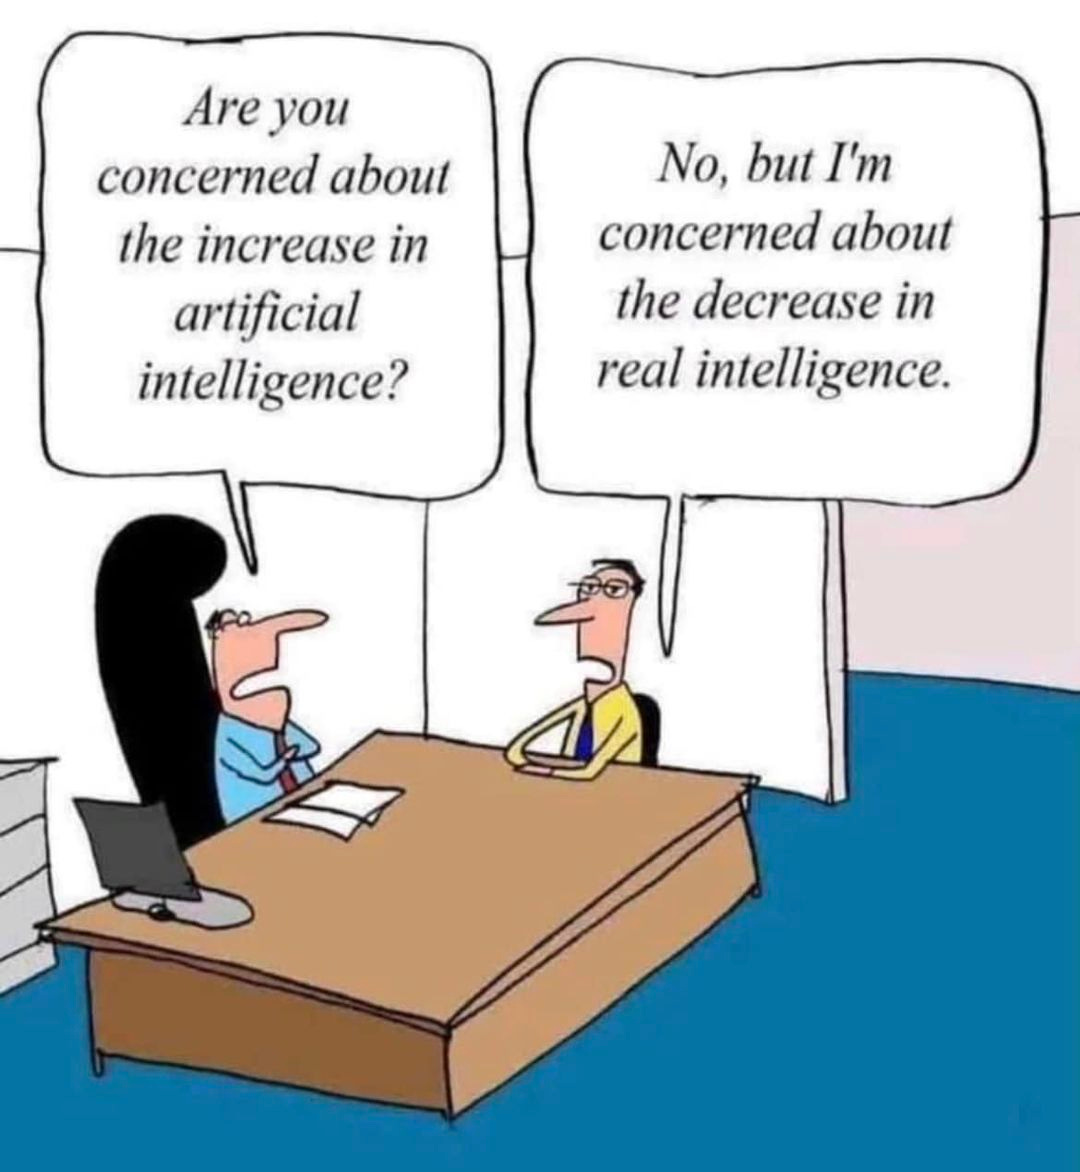 May be a graphic of text that says 'Are you concerned about the increase in artificial intelligence? No, but I'm concerned about the decrease in real intelligence.'